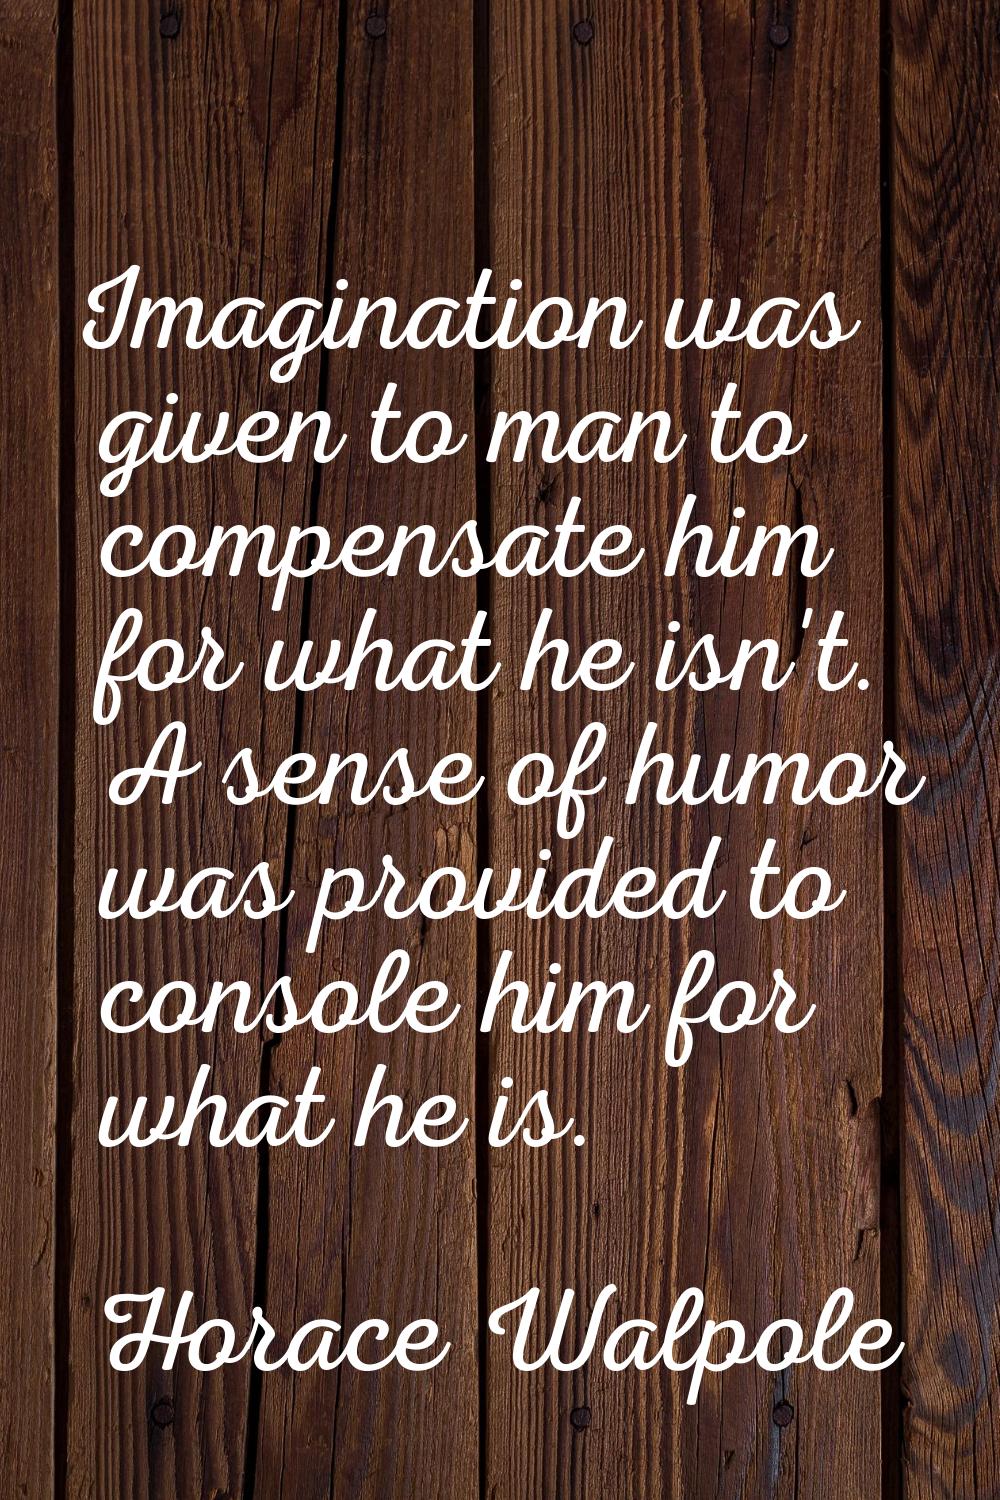 Imagination was given to man to compensate him for what he isn't. A sense of humor was provided to 